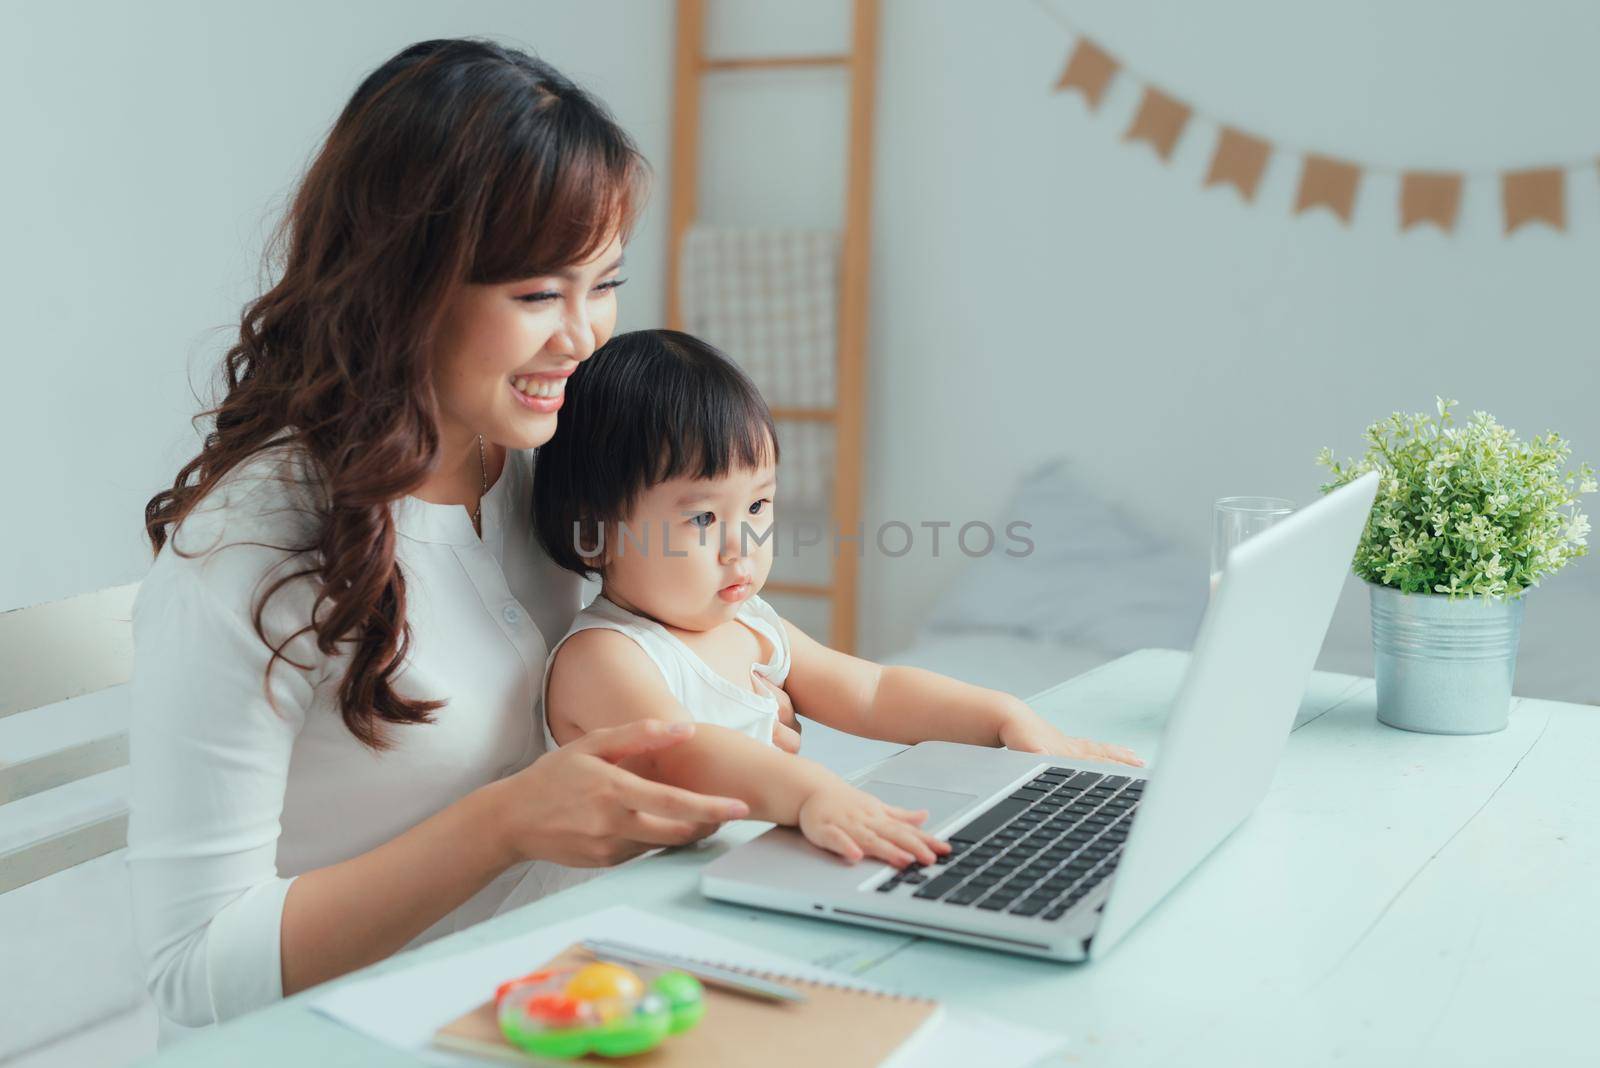 Working mother concept. Young woman working on laptop with her child from home by makidotvn